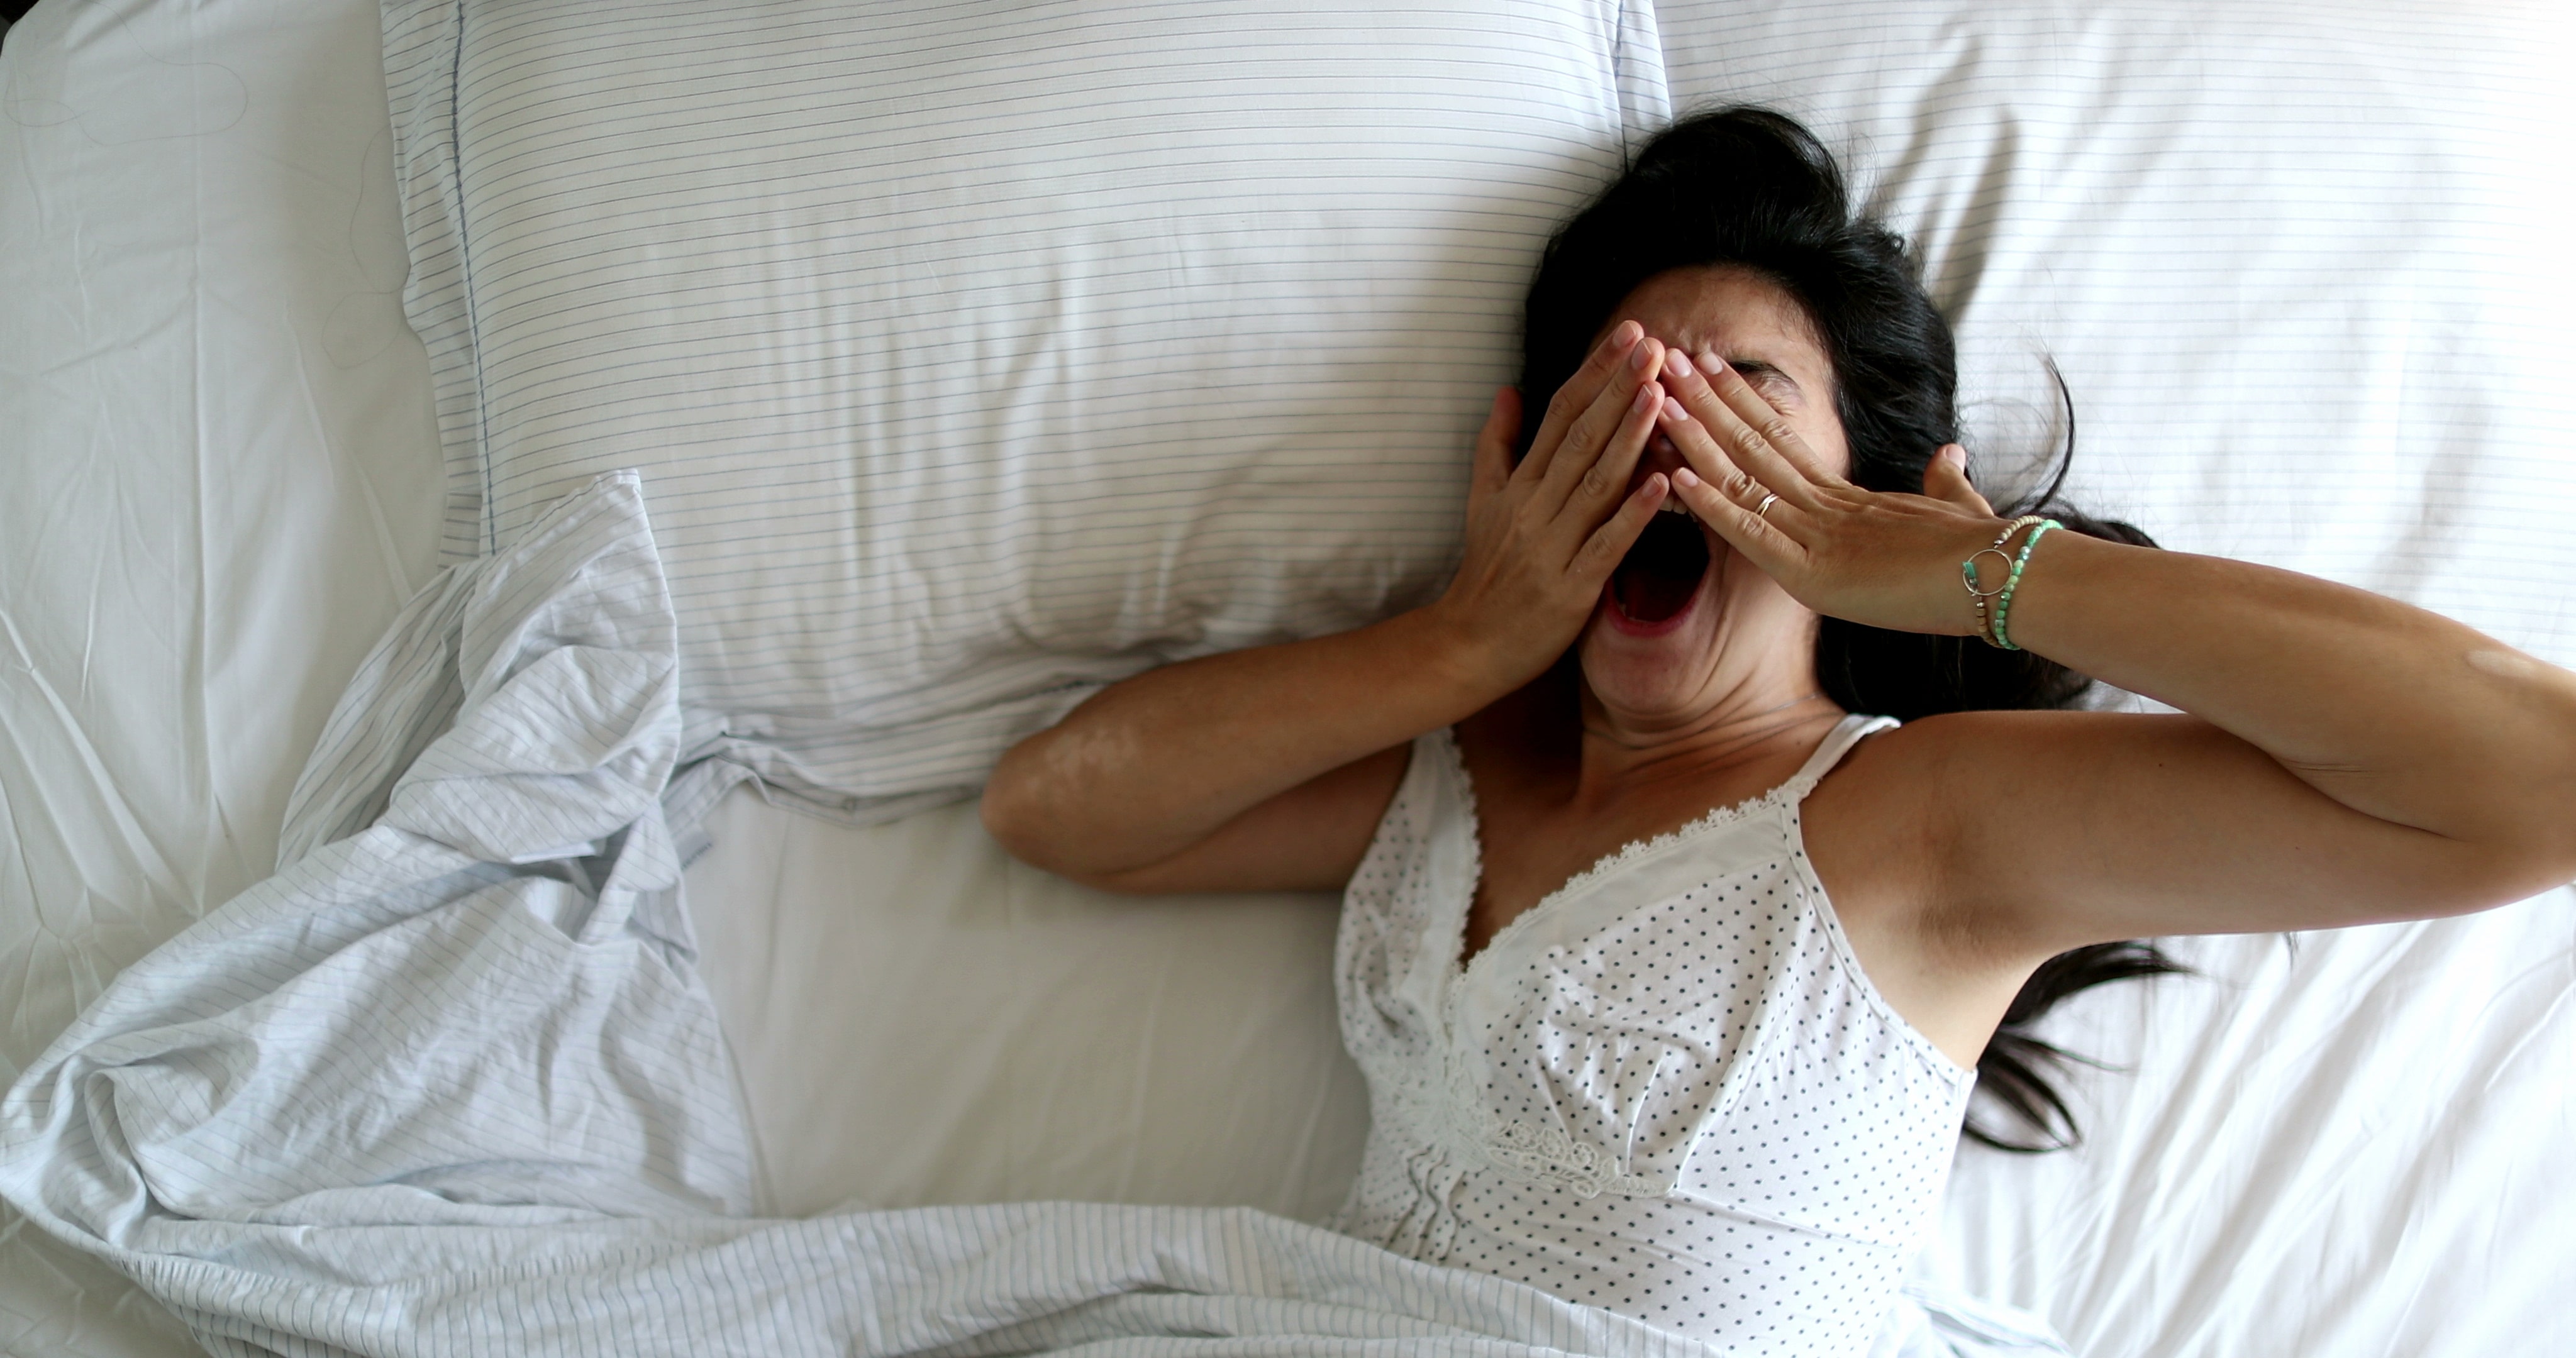 A woman yawning and stretching in her bed after having a poor night's sleep.